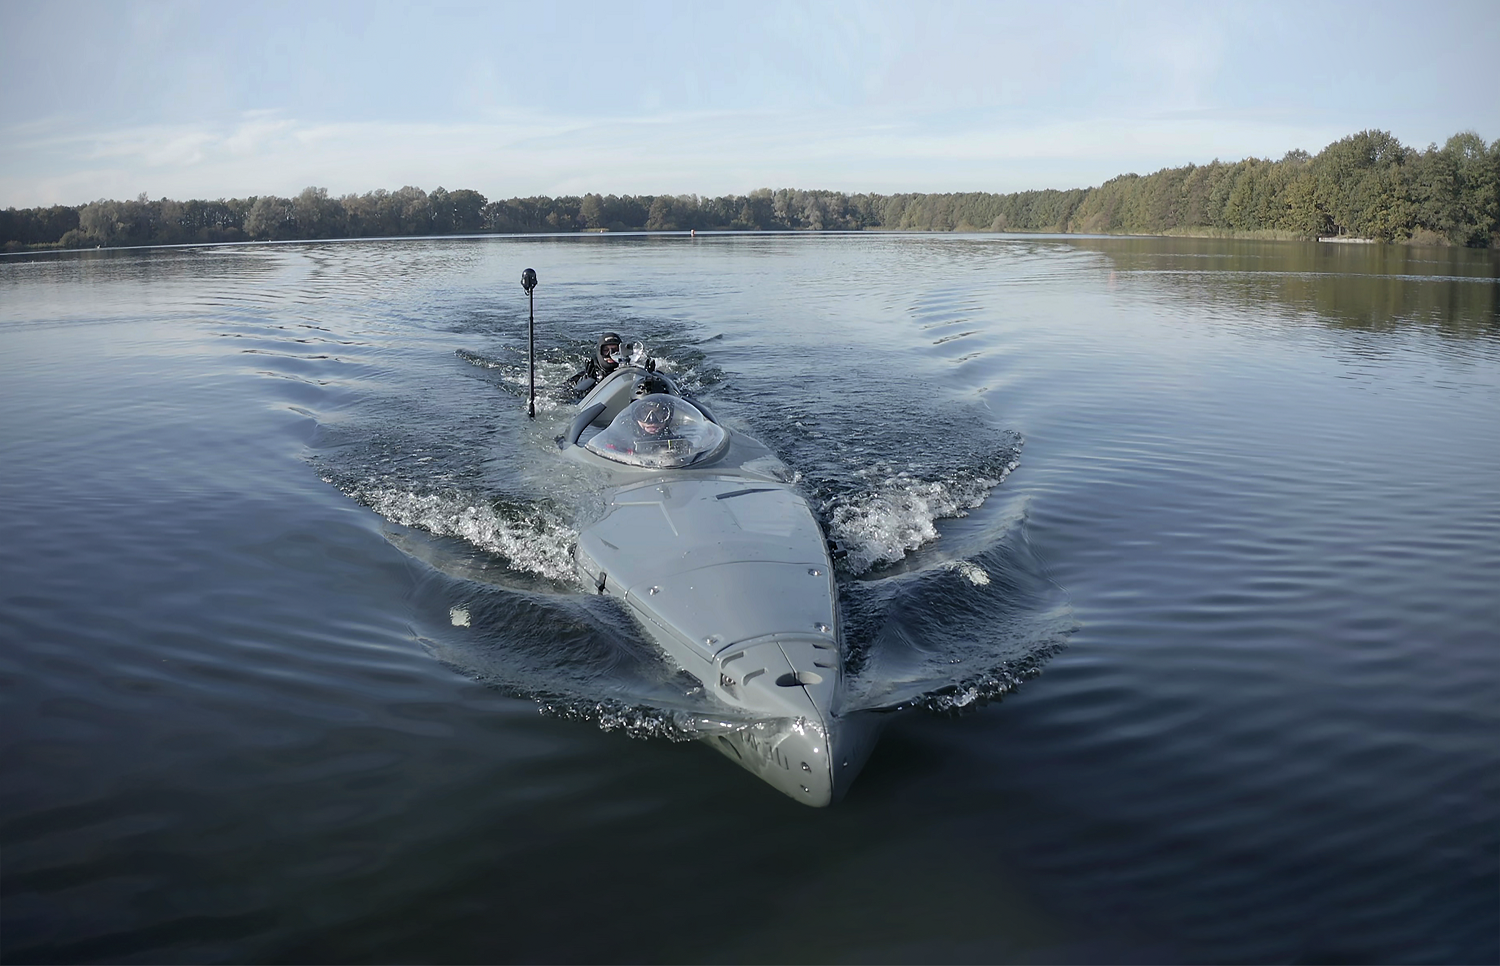  Shadow Seal is a unique four man Tactical Diving Vehicle (TDV) design that enables the discrete and covert transportation of four operators and equipment on the surface, semi-submerged or fully submerged. (Photo by JFD)